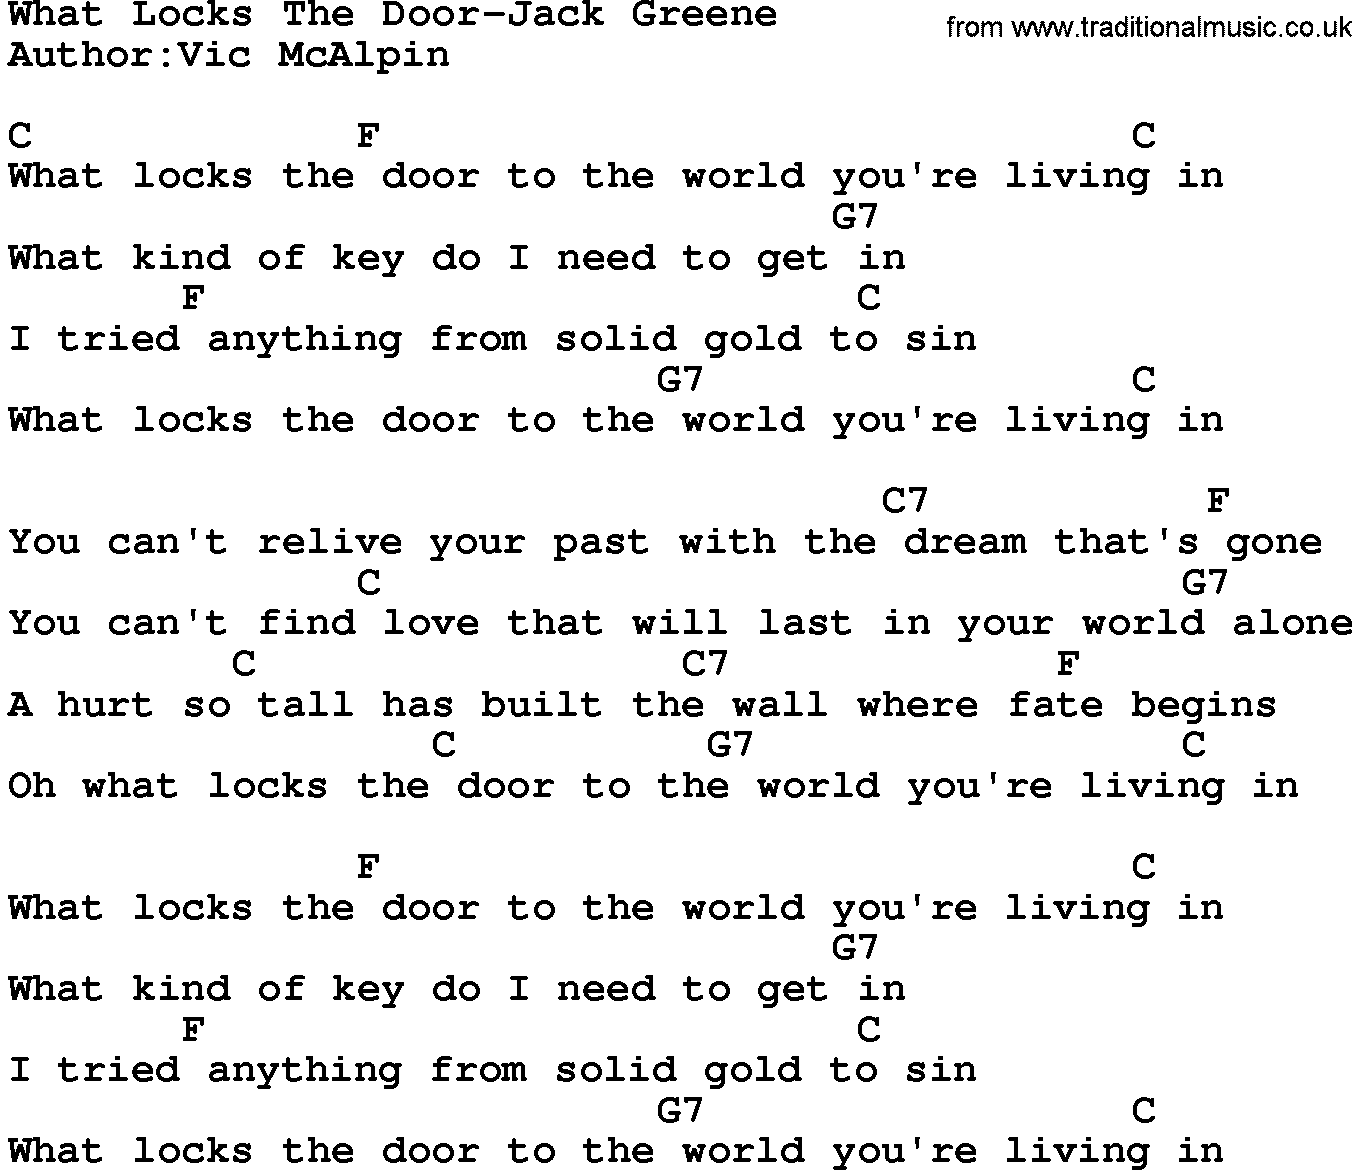 Country music song: What Locks The Door-Jack Greene lyrics and chords